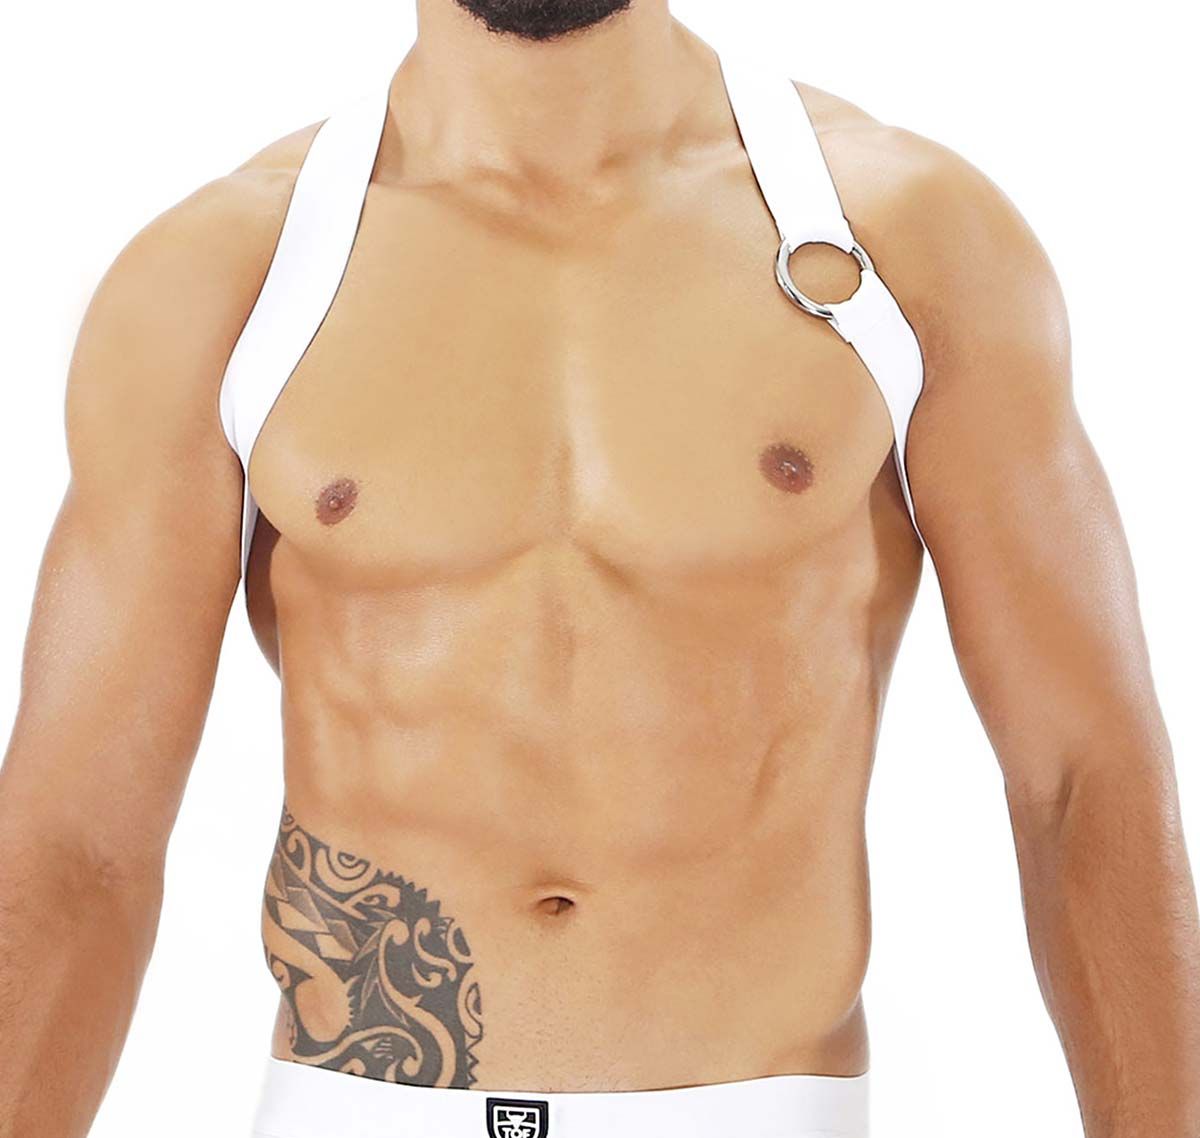 TOF Imbracatura PARTY BOY ELASTIC HARNESS WHITE H0018B, bianco